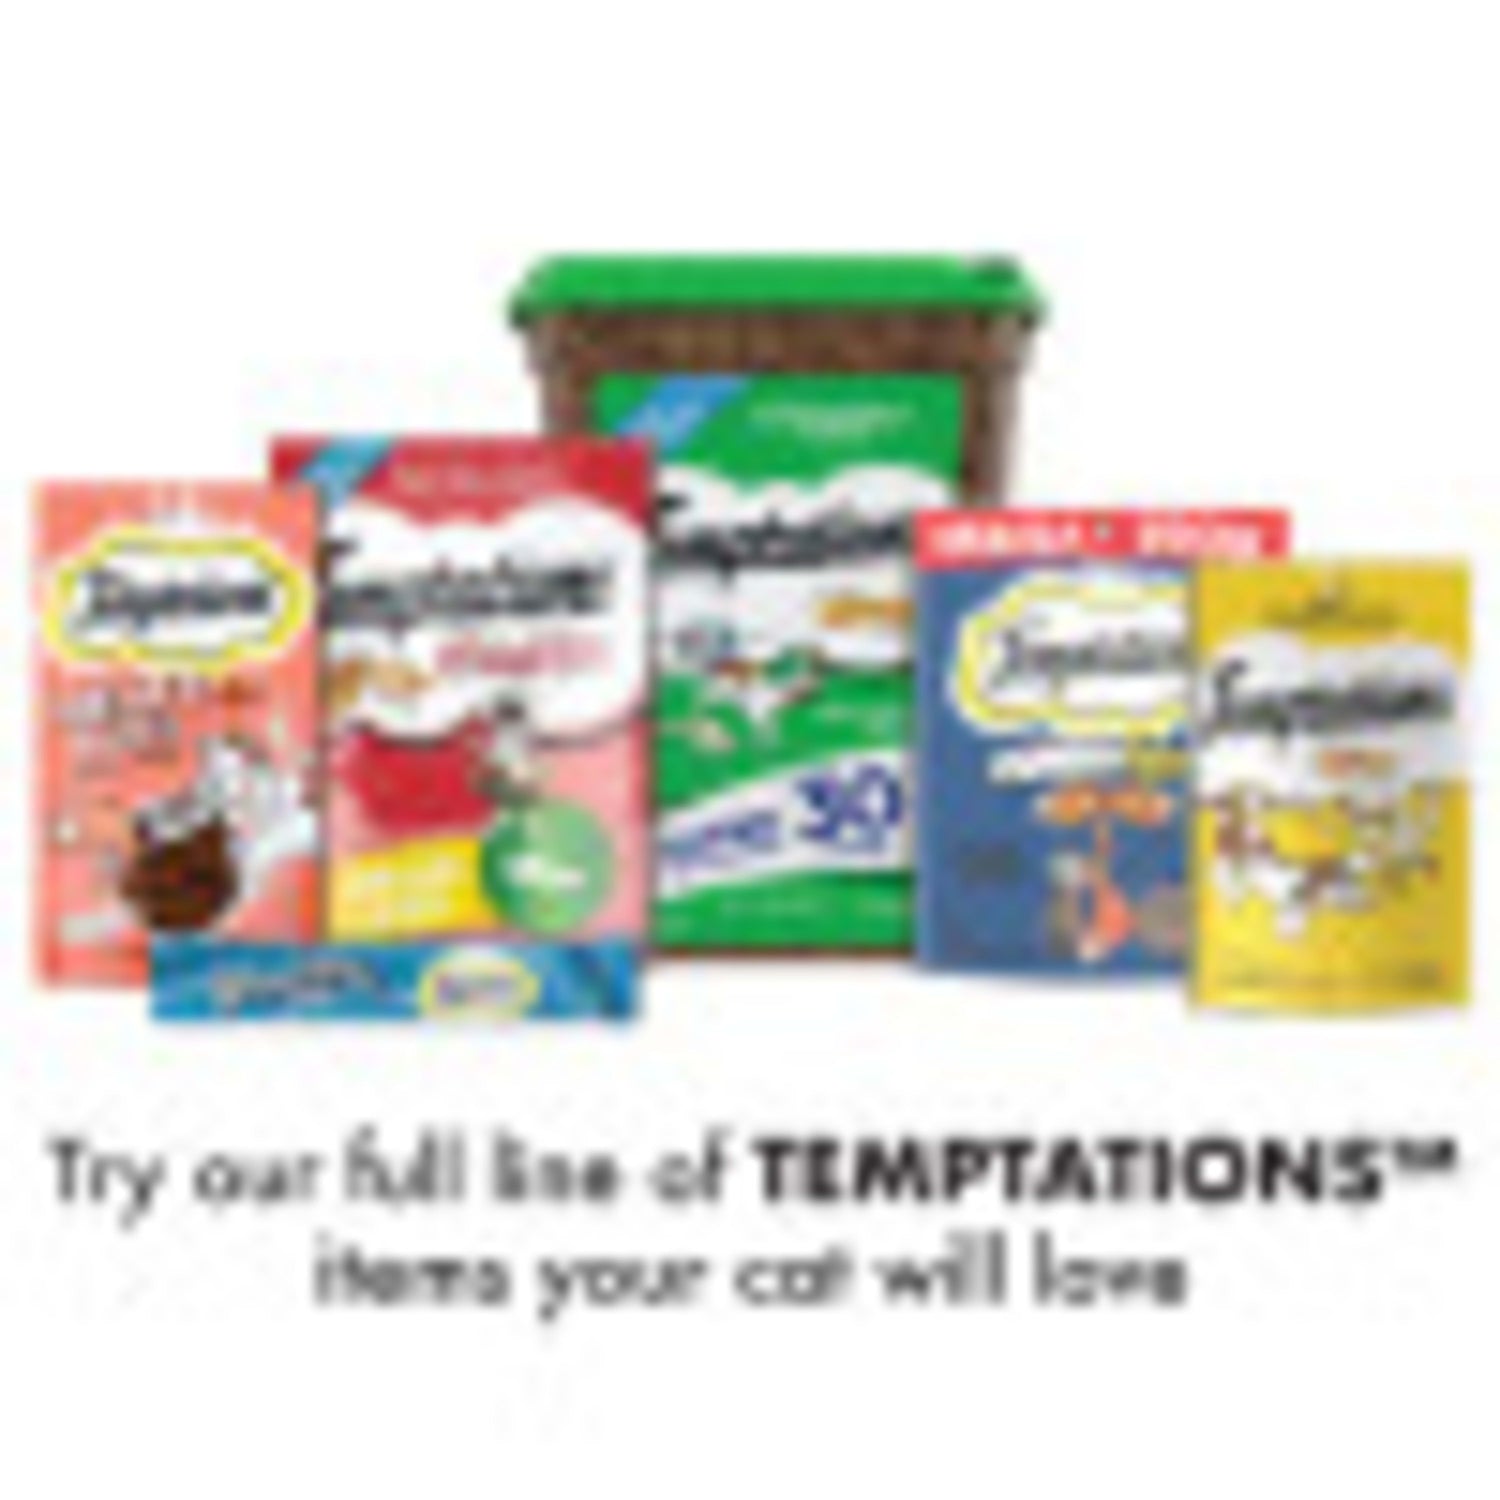 TEMPTATIONS Classic, Crunchy and Soft Cat Treats Feline Favorites Variety Pack, Seafood Medley Flavor, Tasty Chicken Flavor, Creamy Dairy Flavor, and Tempting Tuna Flavor, (4) 3 Oz. Pouches